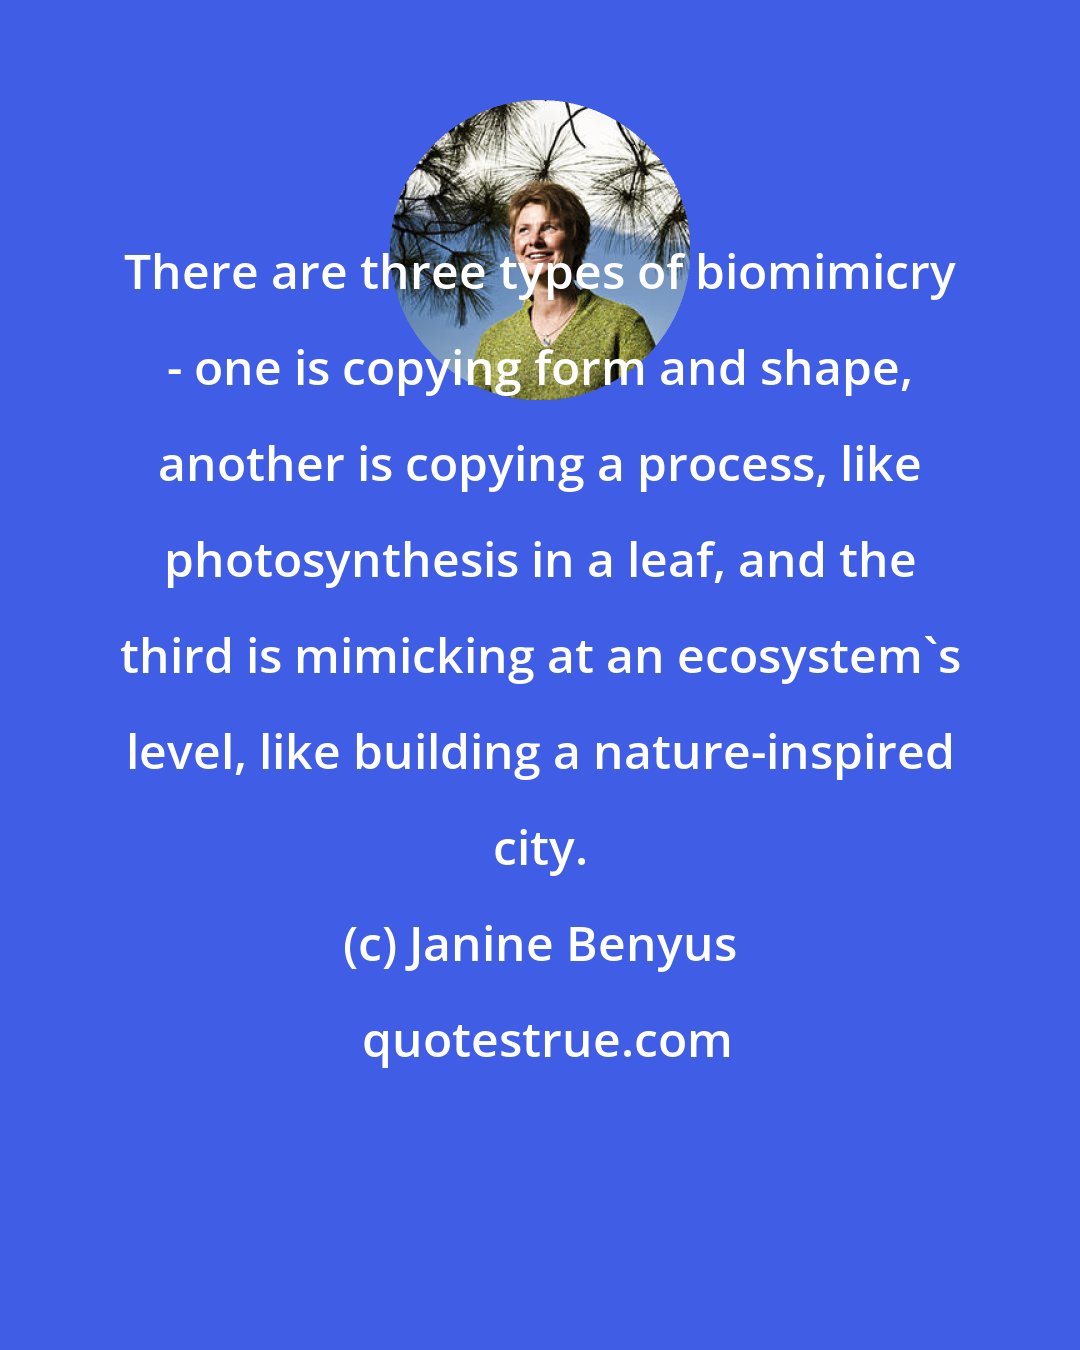 Janine Benyus: There are three types of biomimicry - one is copying form and shape, another is copying a process, like photosynthesis in a leaf, and the third is mimicking at an ecosystem's level, like building a nature-inspired city.